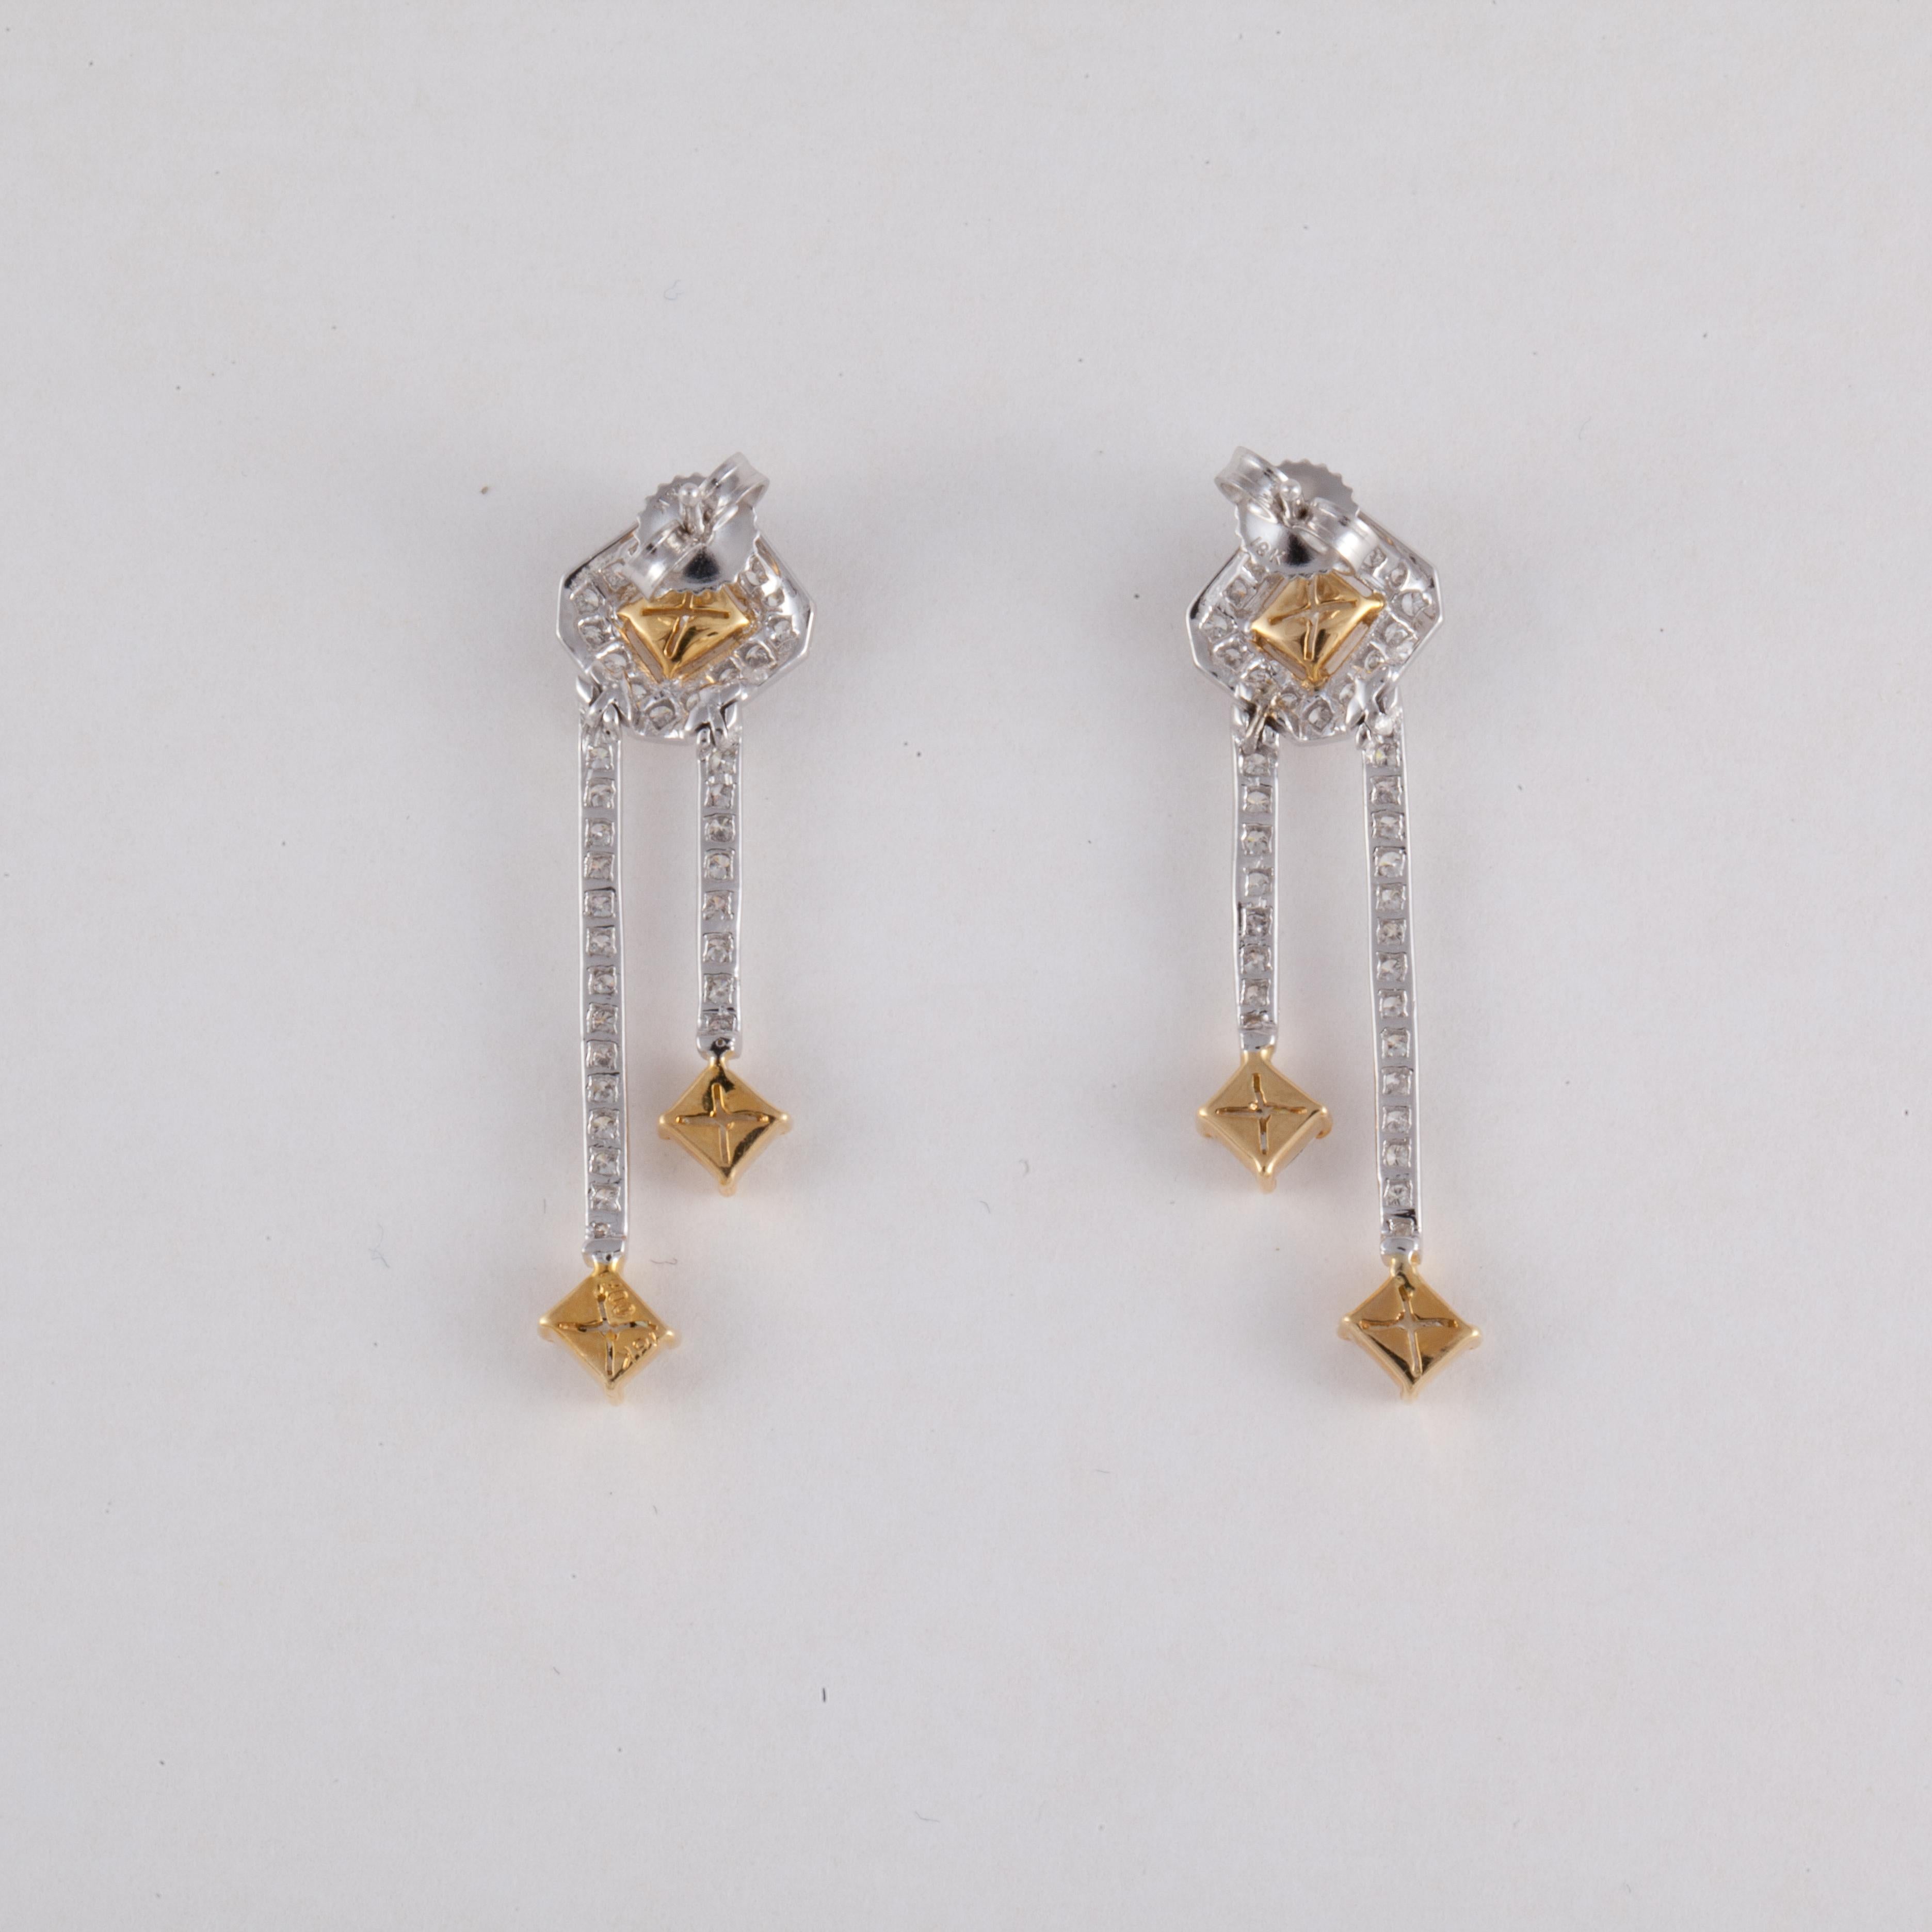 Earrings set in platinum and 18K yellow gold.  They feature six (6) fancy light yellow and fancy yellow diamonds totaling 1 .15 carats which are VS2-I1 clarity.  Additionally, there are 108 round diamonds that total 0.90 carats;  G-H color and